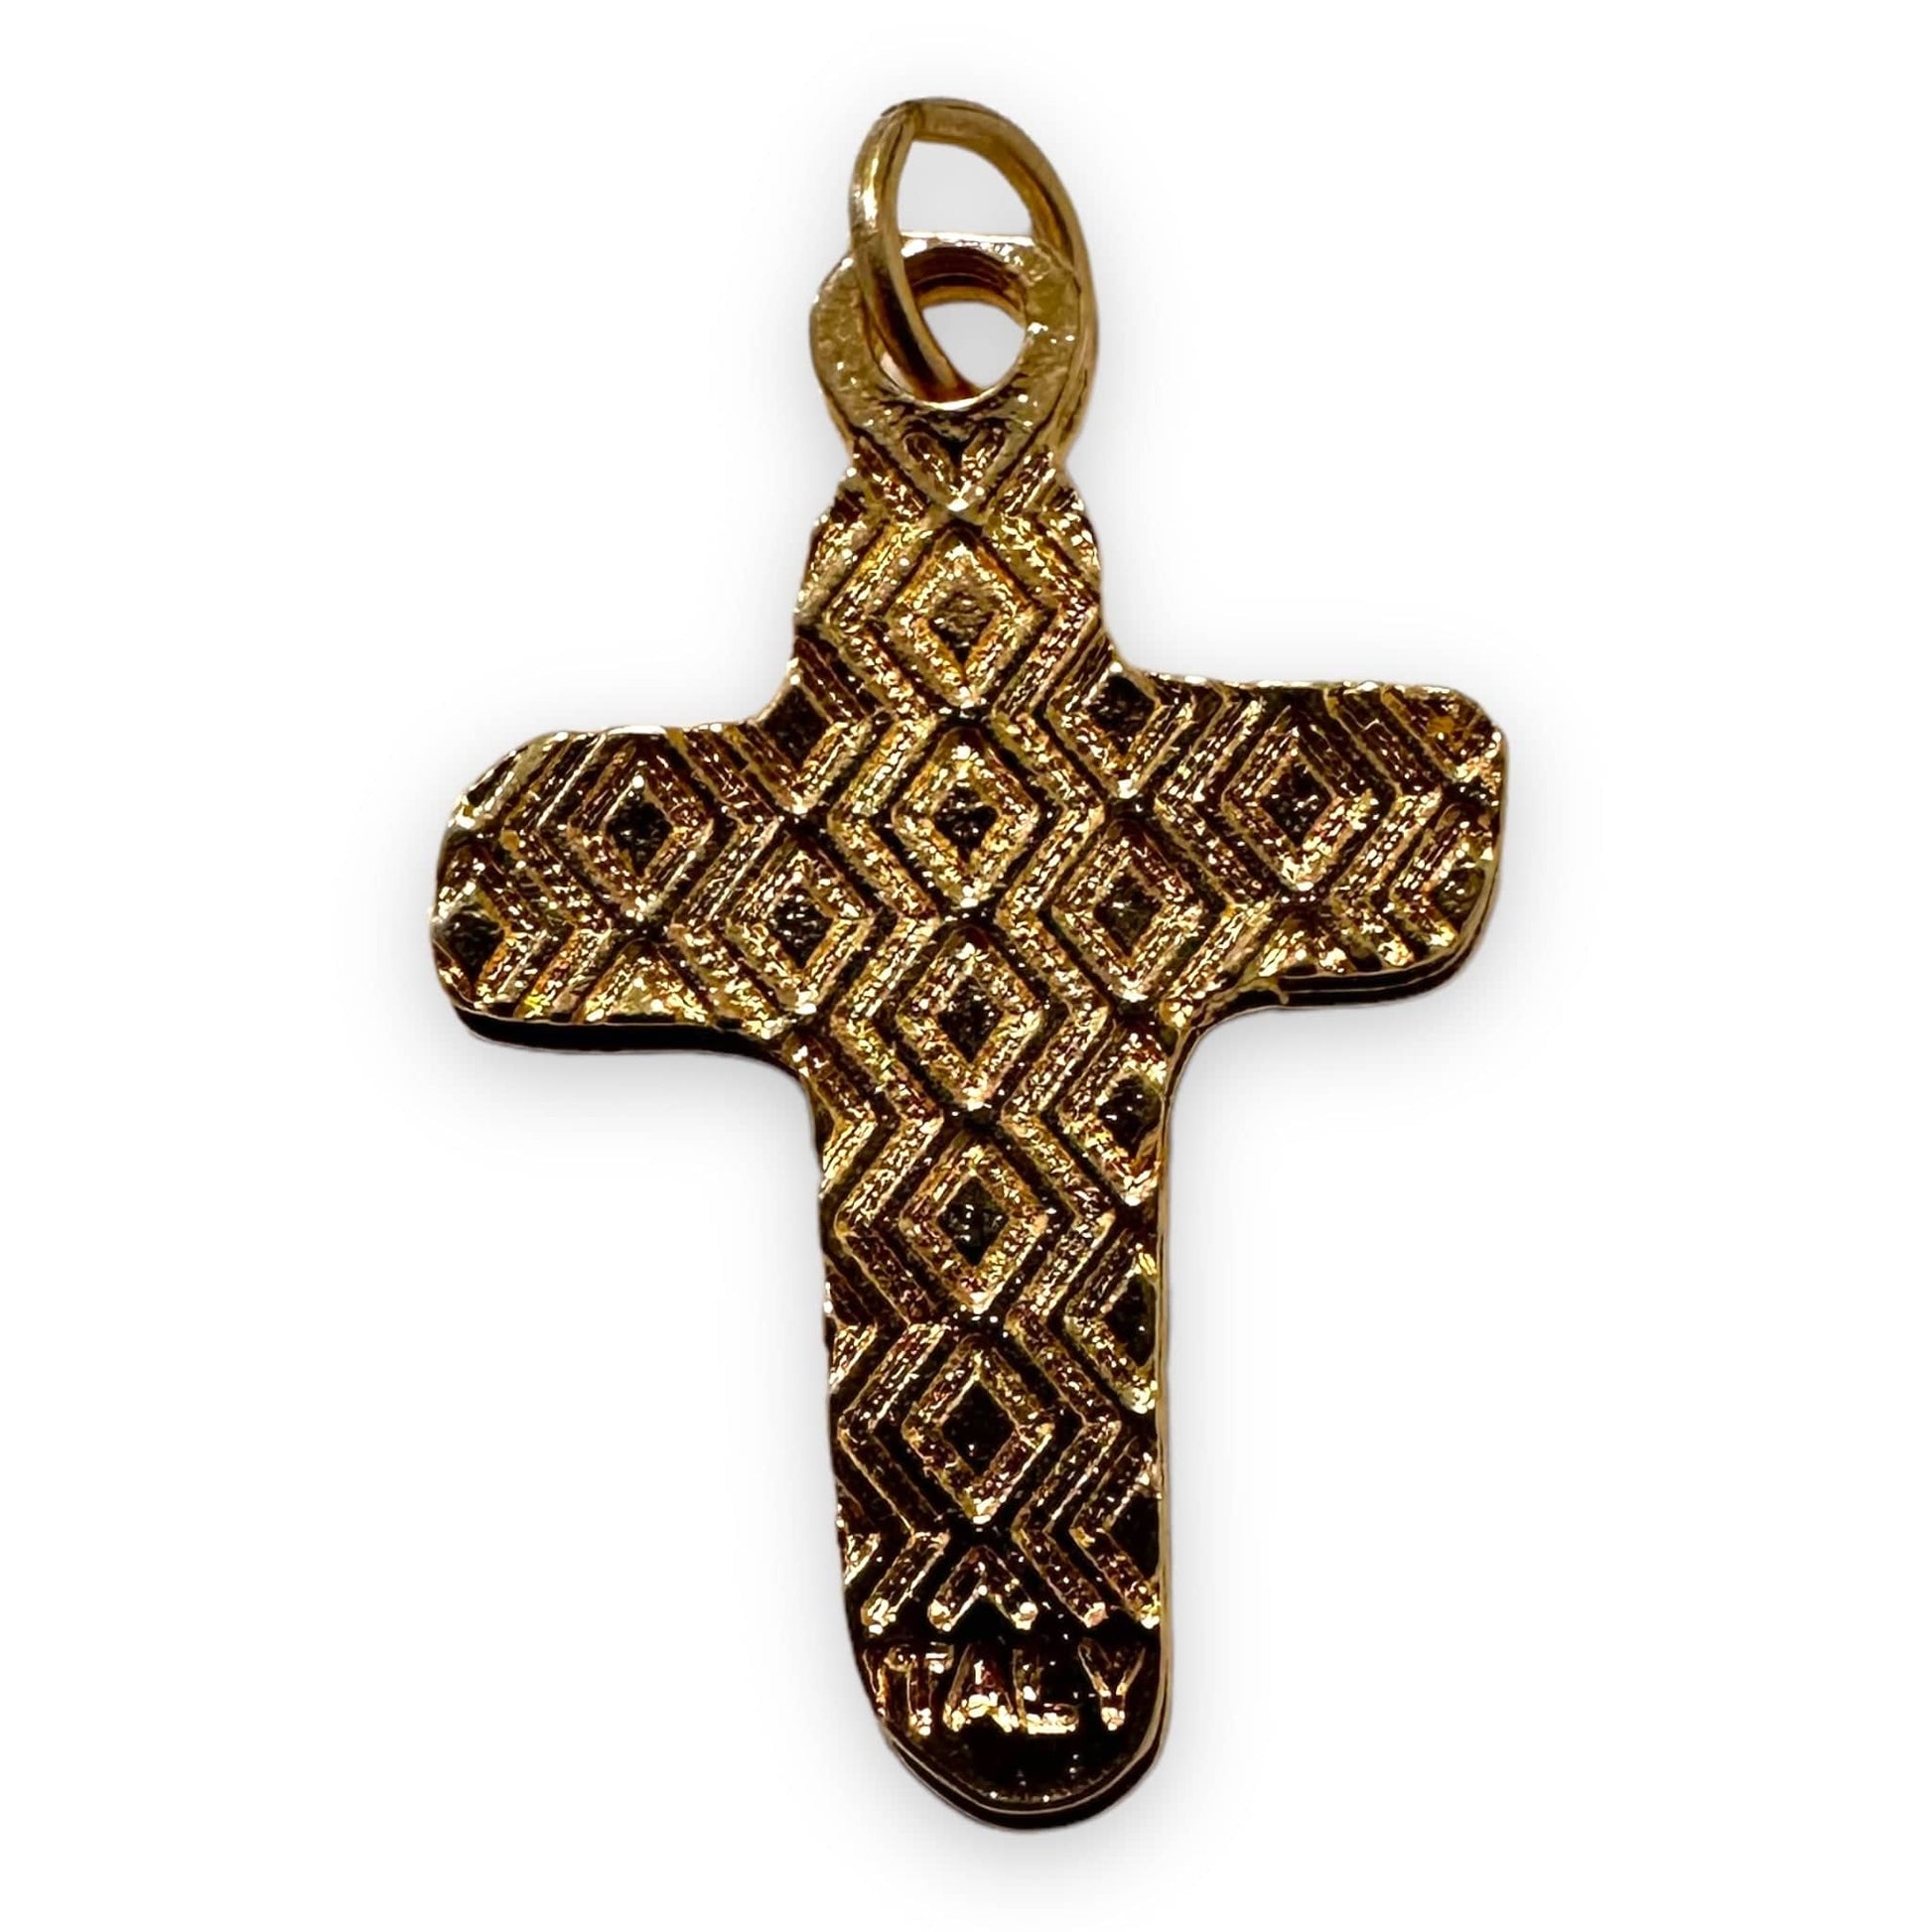 Catholically Crucifix Sorrowful Mother Pectoral Cross - 1" Small Crucifix - Blessed By Pope - Parts